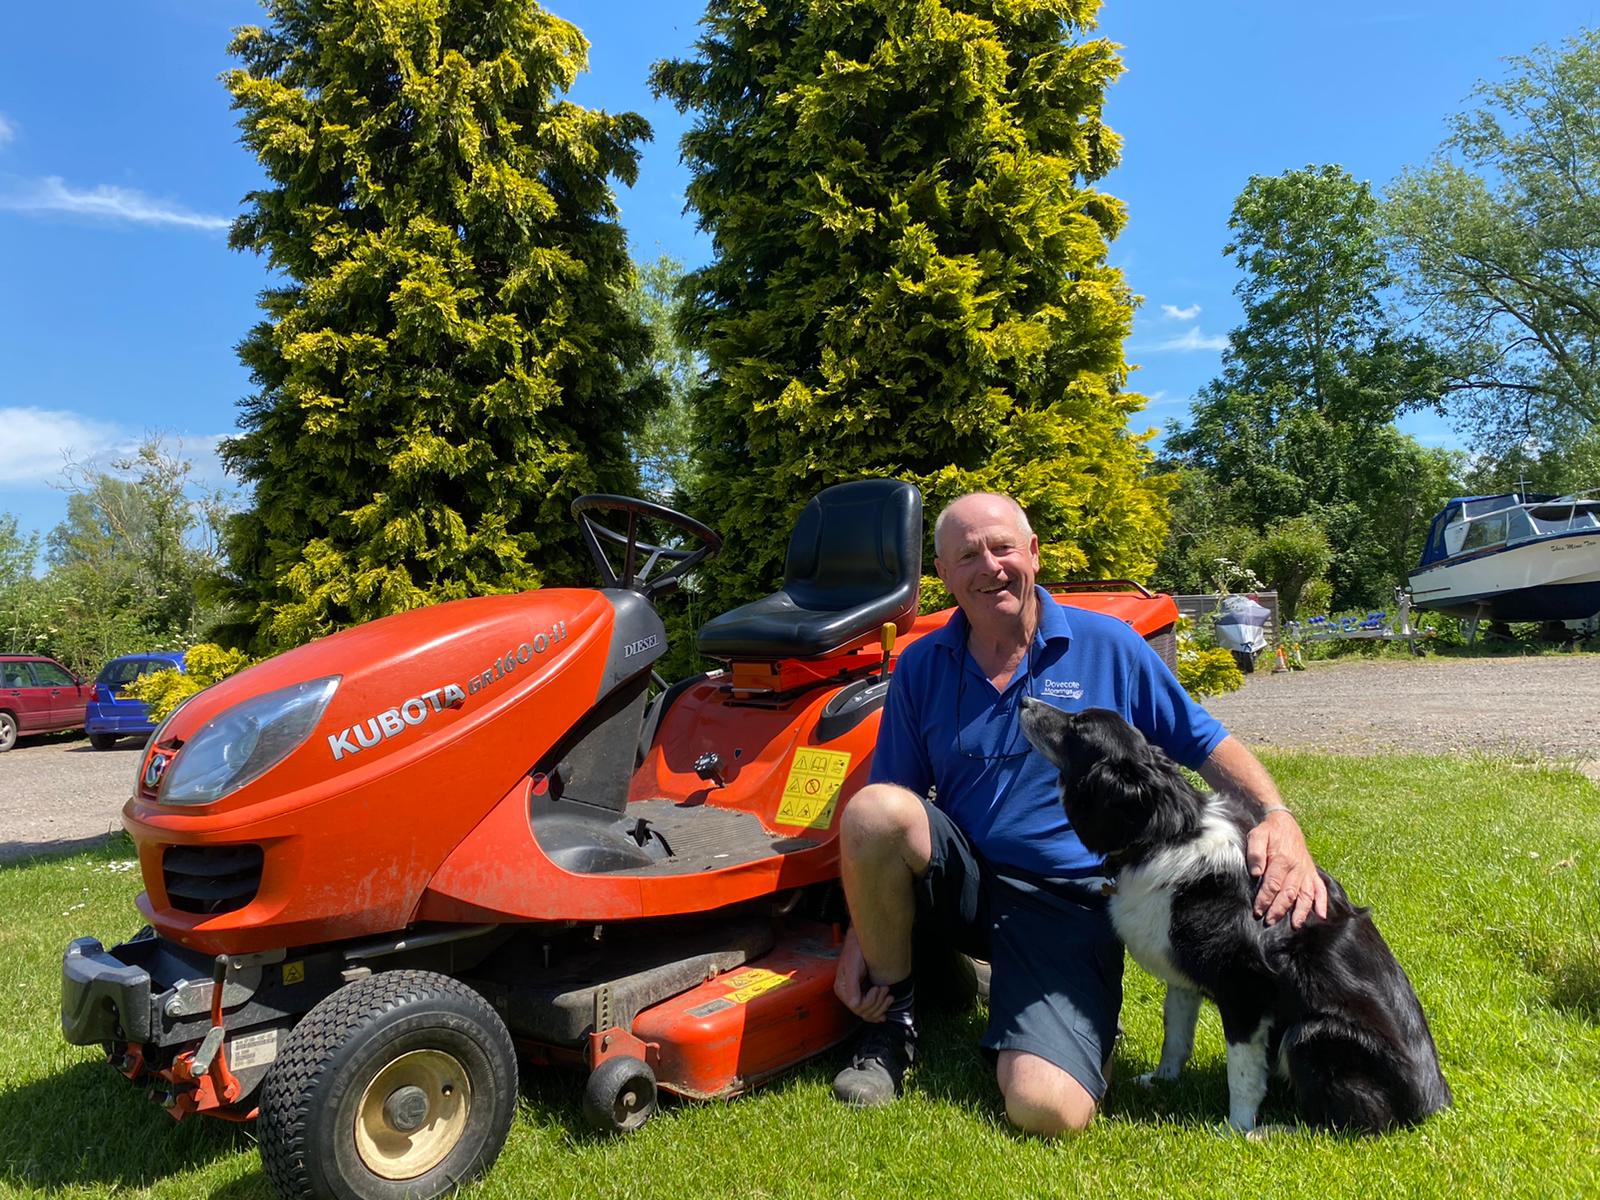 Mark crouching next to a red tractor with his black and white border collie Charlie.